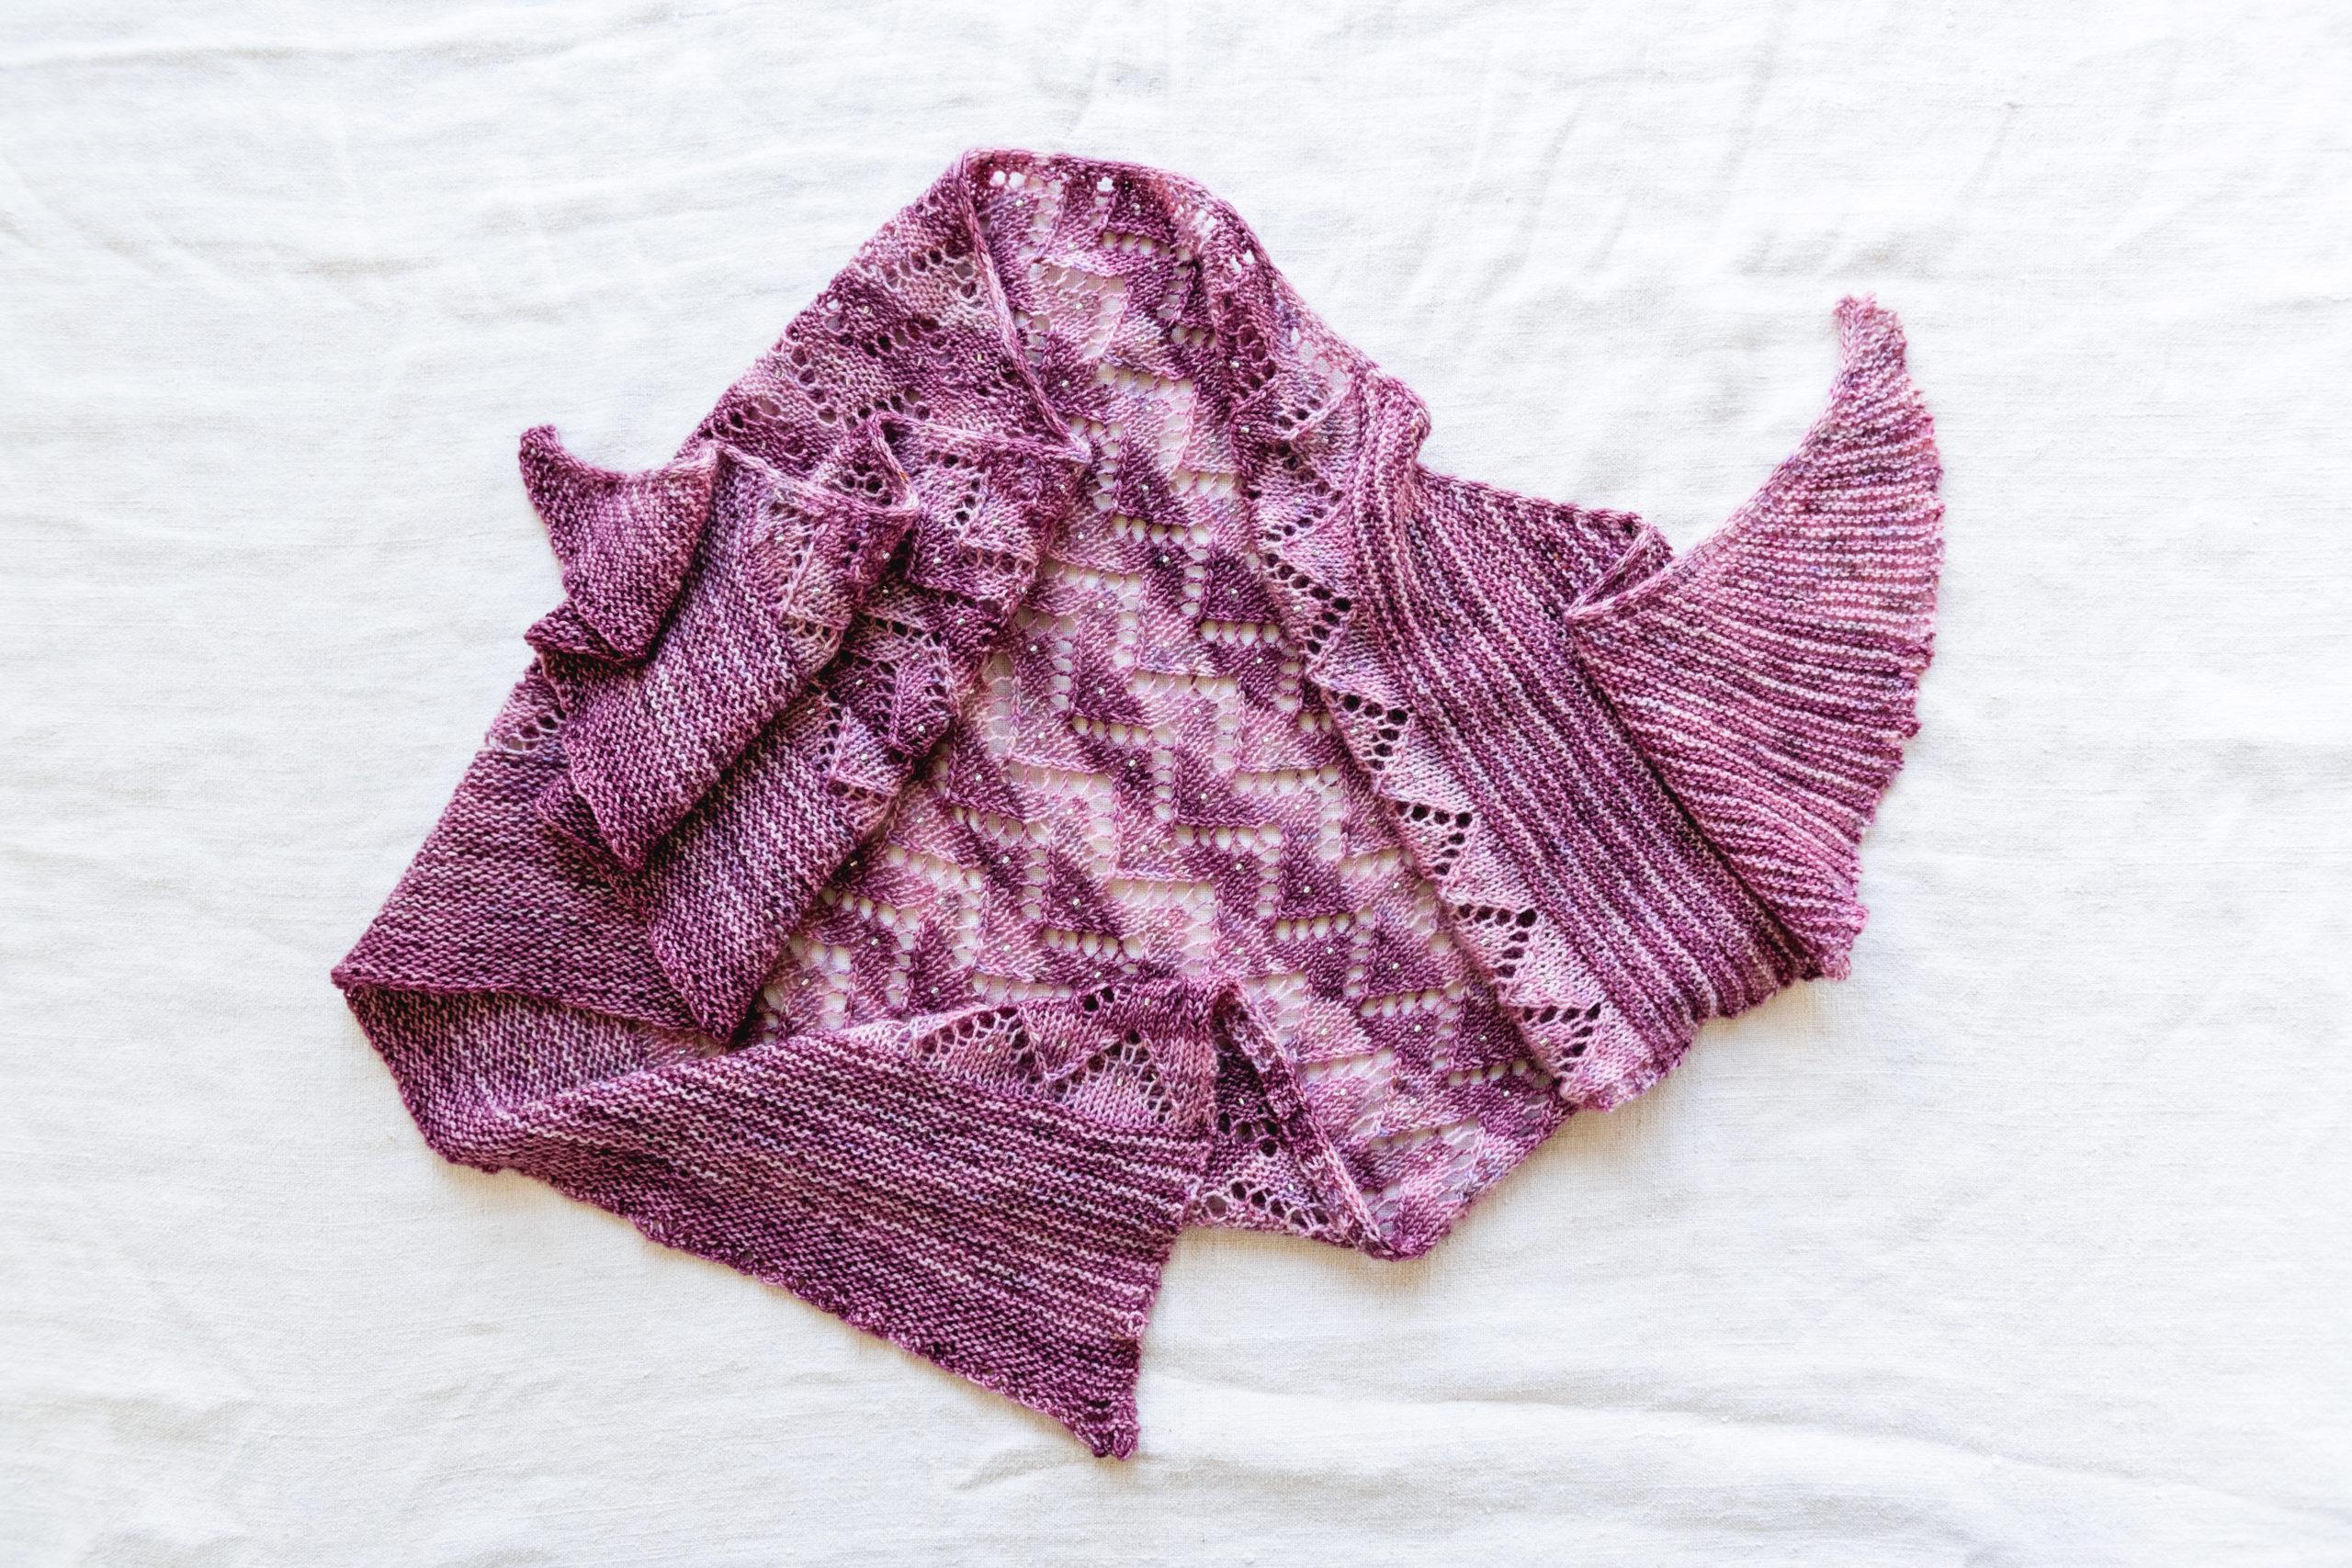 A handknit purple shawl with stripes of lighter pink and darker purple yarn, with a zigzag lace pattern and tiny sparkling beads knit into the fabric.